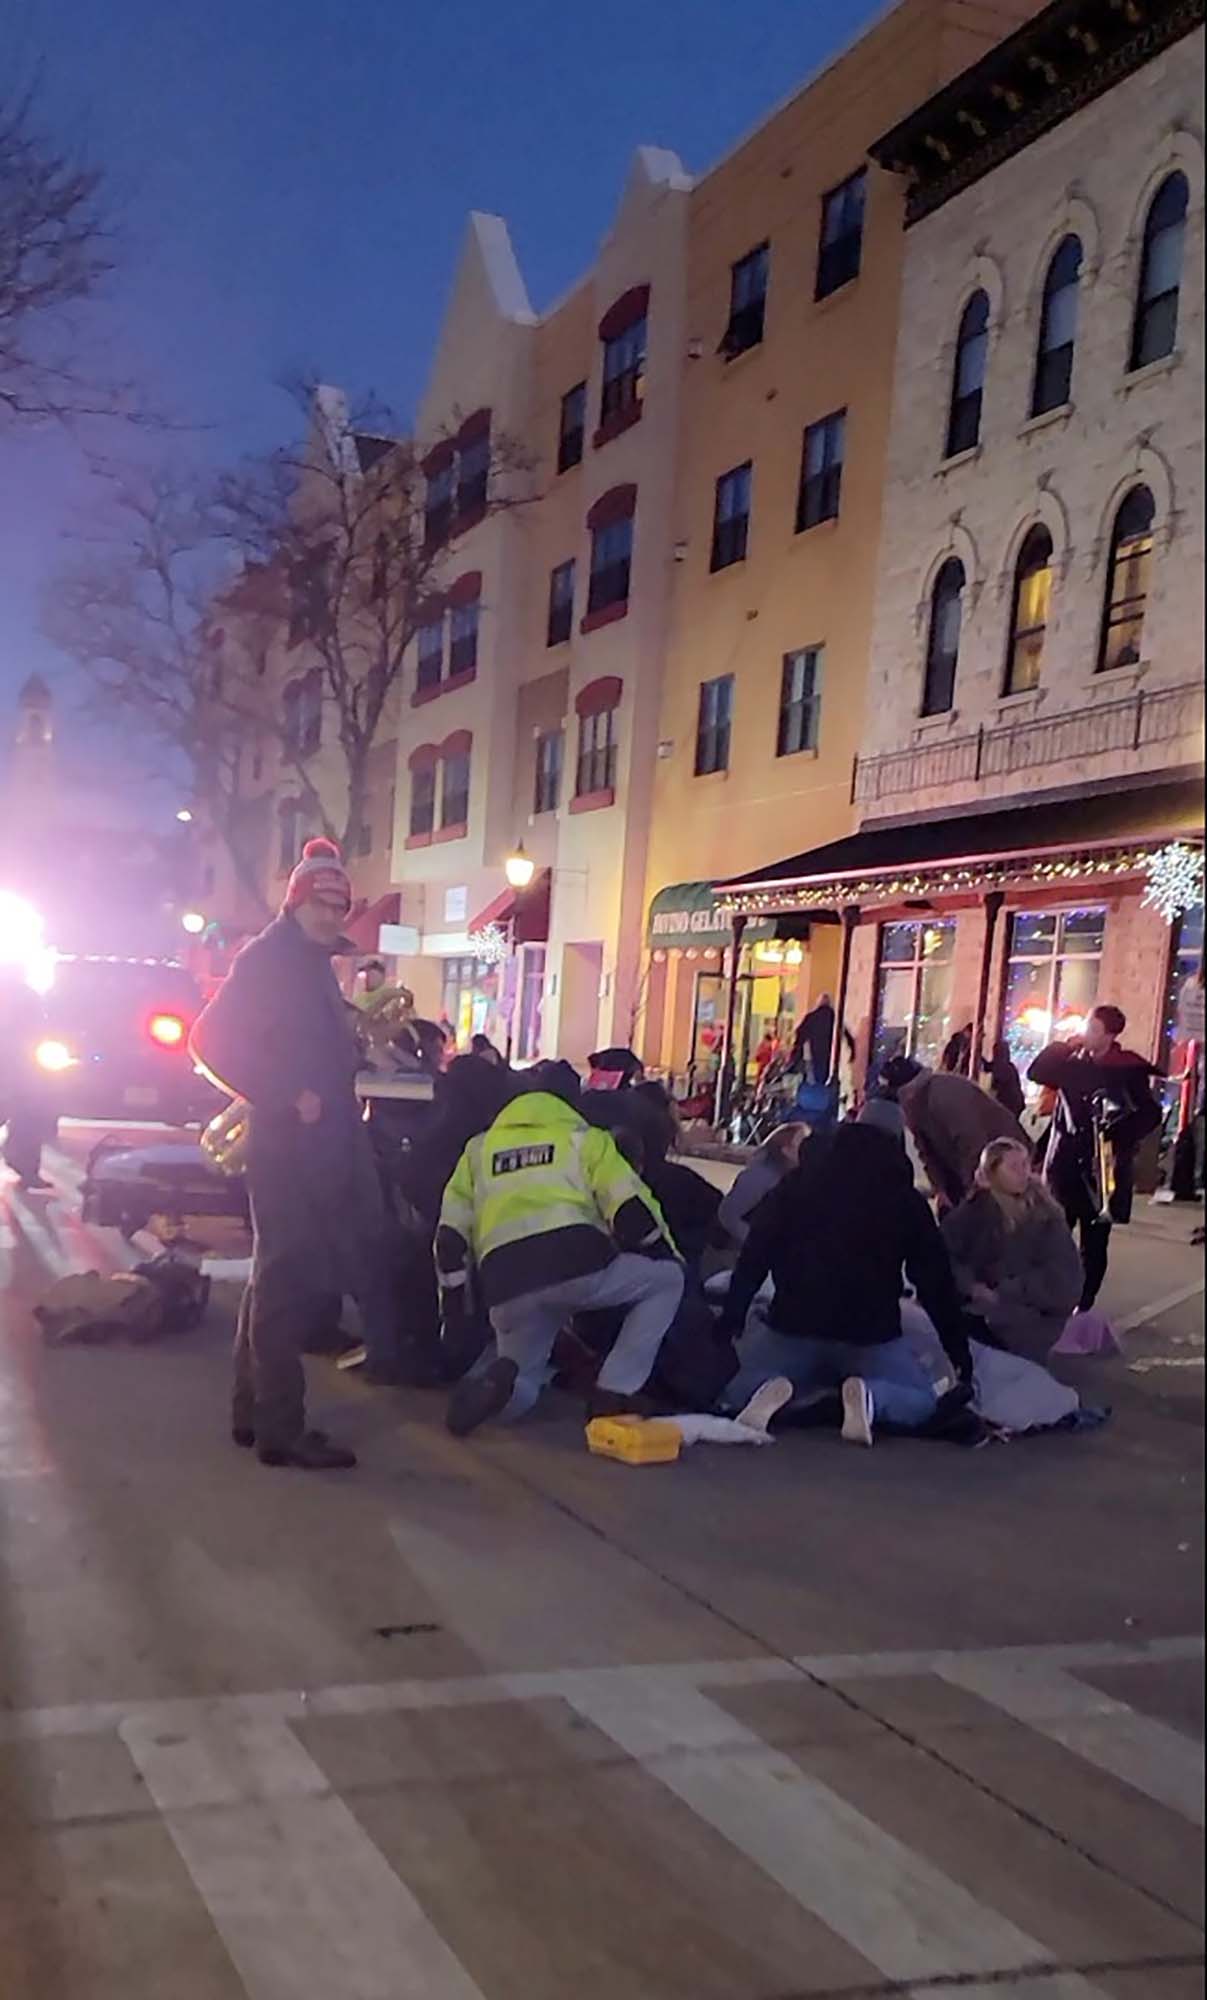 Emergency responders and passersby attend to injured people after a vehicle plowed through the crowd.